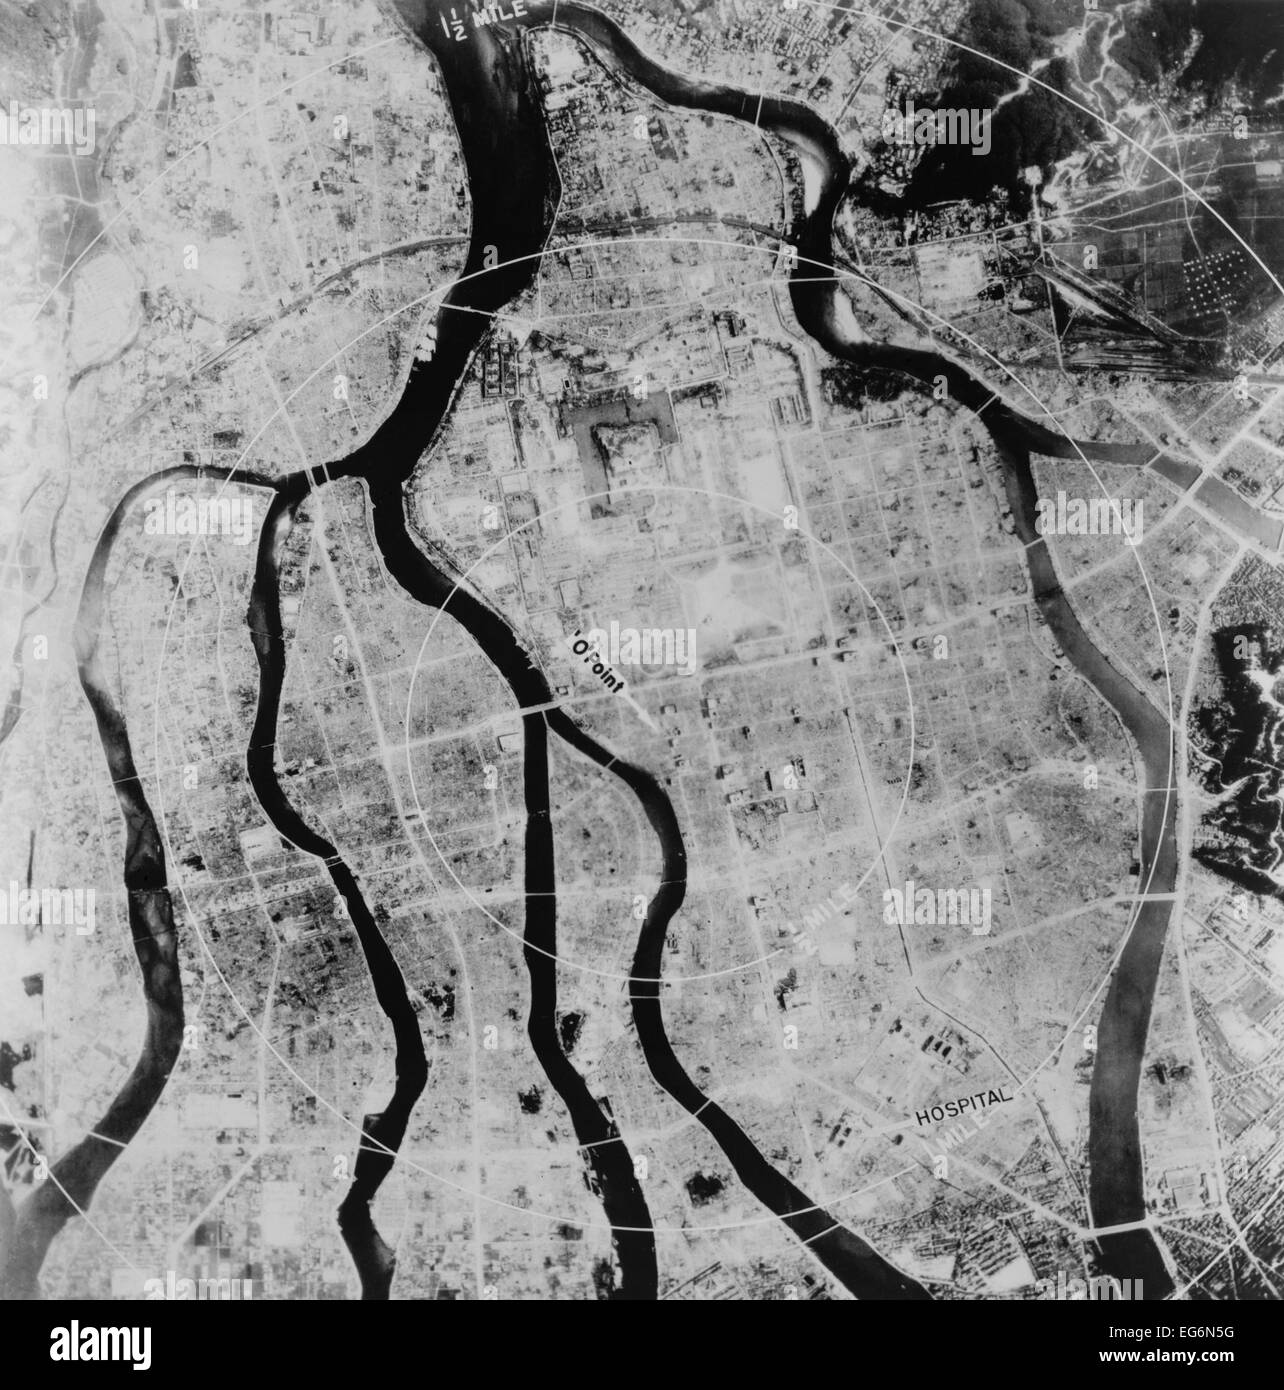 Aerial view of Hiroshima after the atomic bombing of August 6, 1945. The city was located on a flat river delta, with few Stock Photo